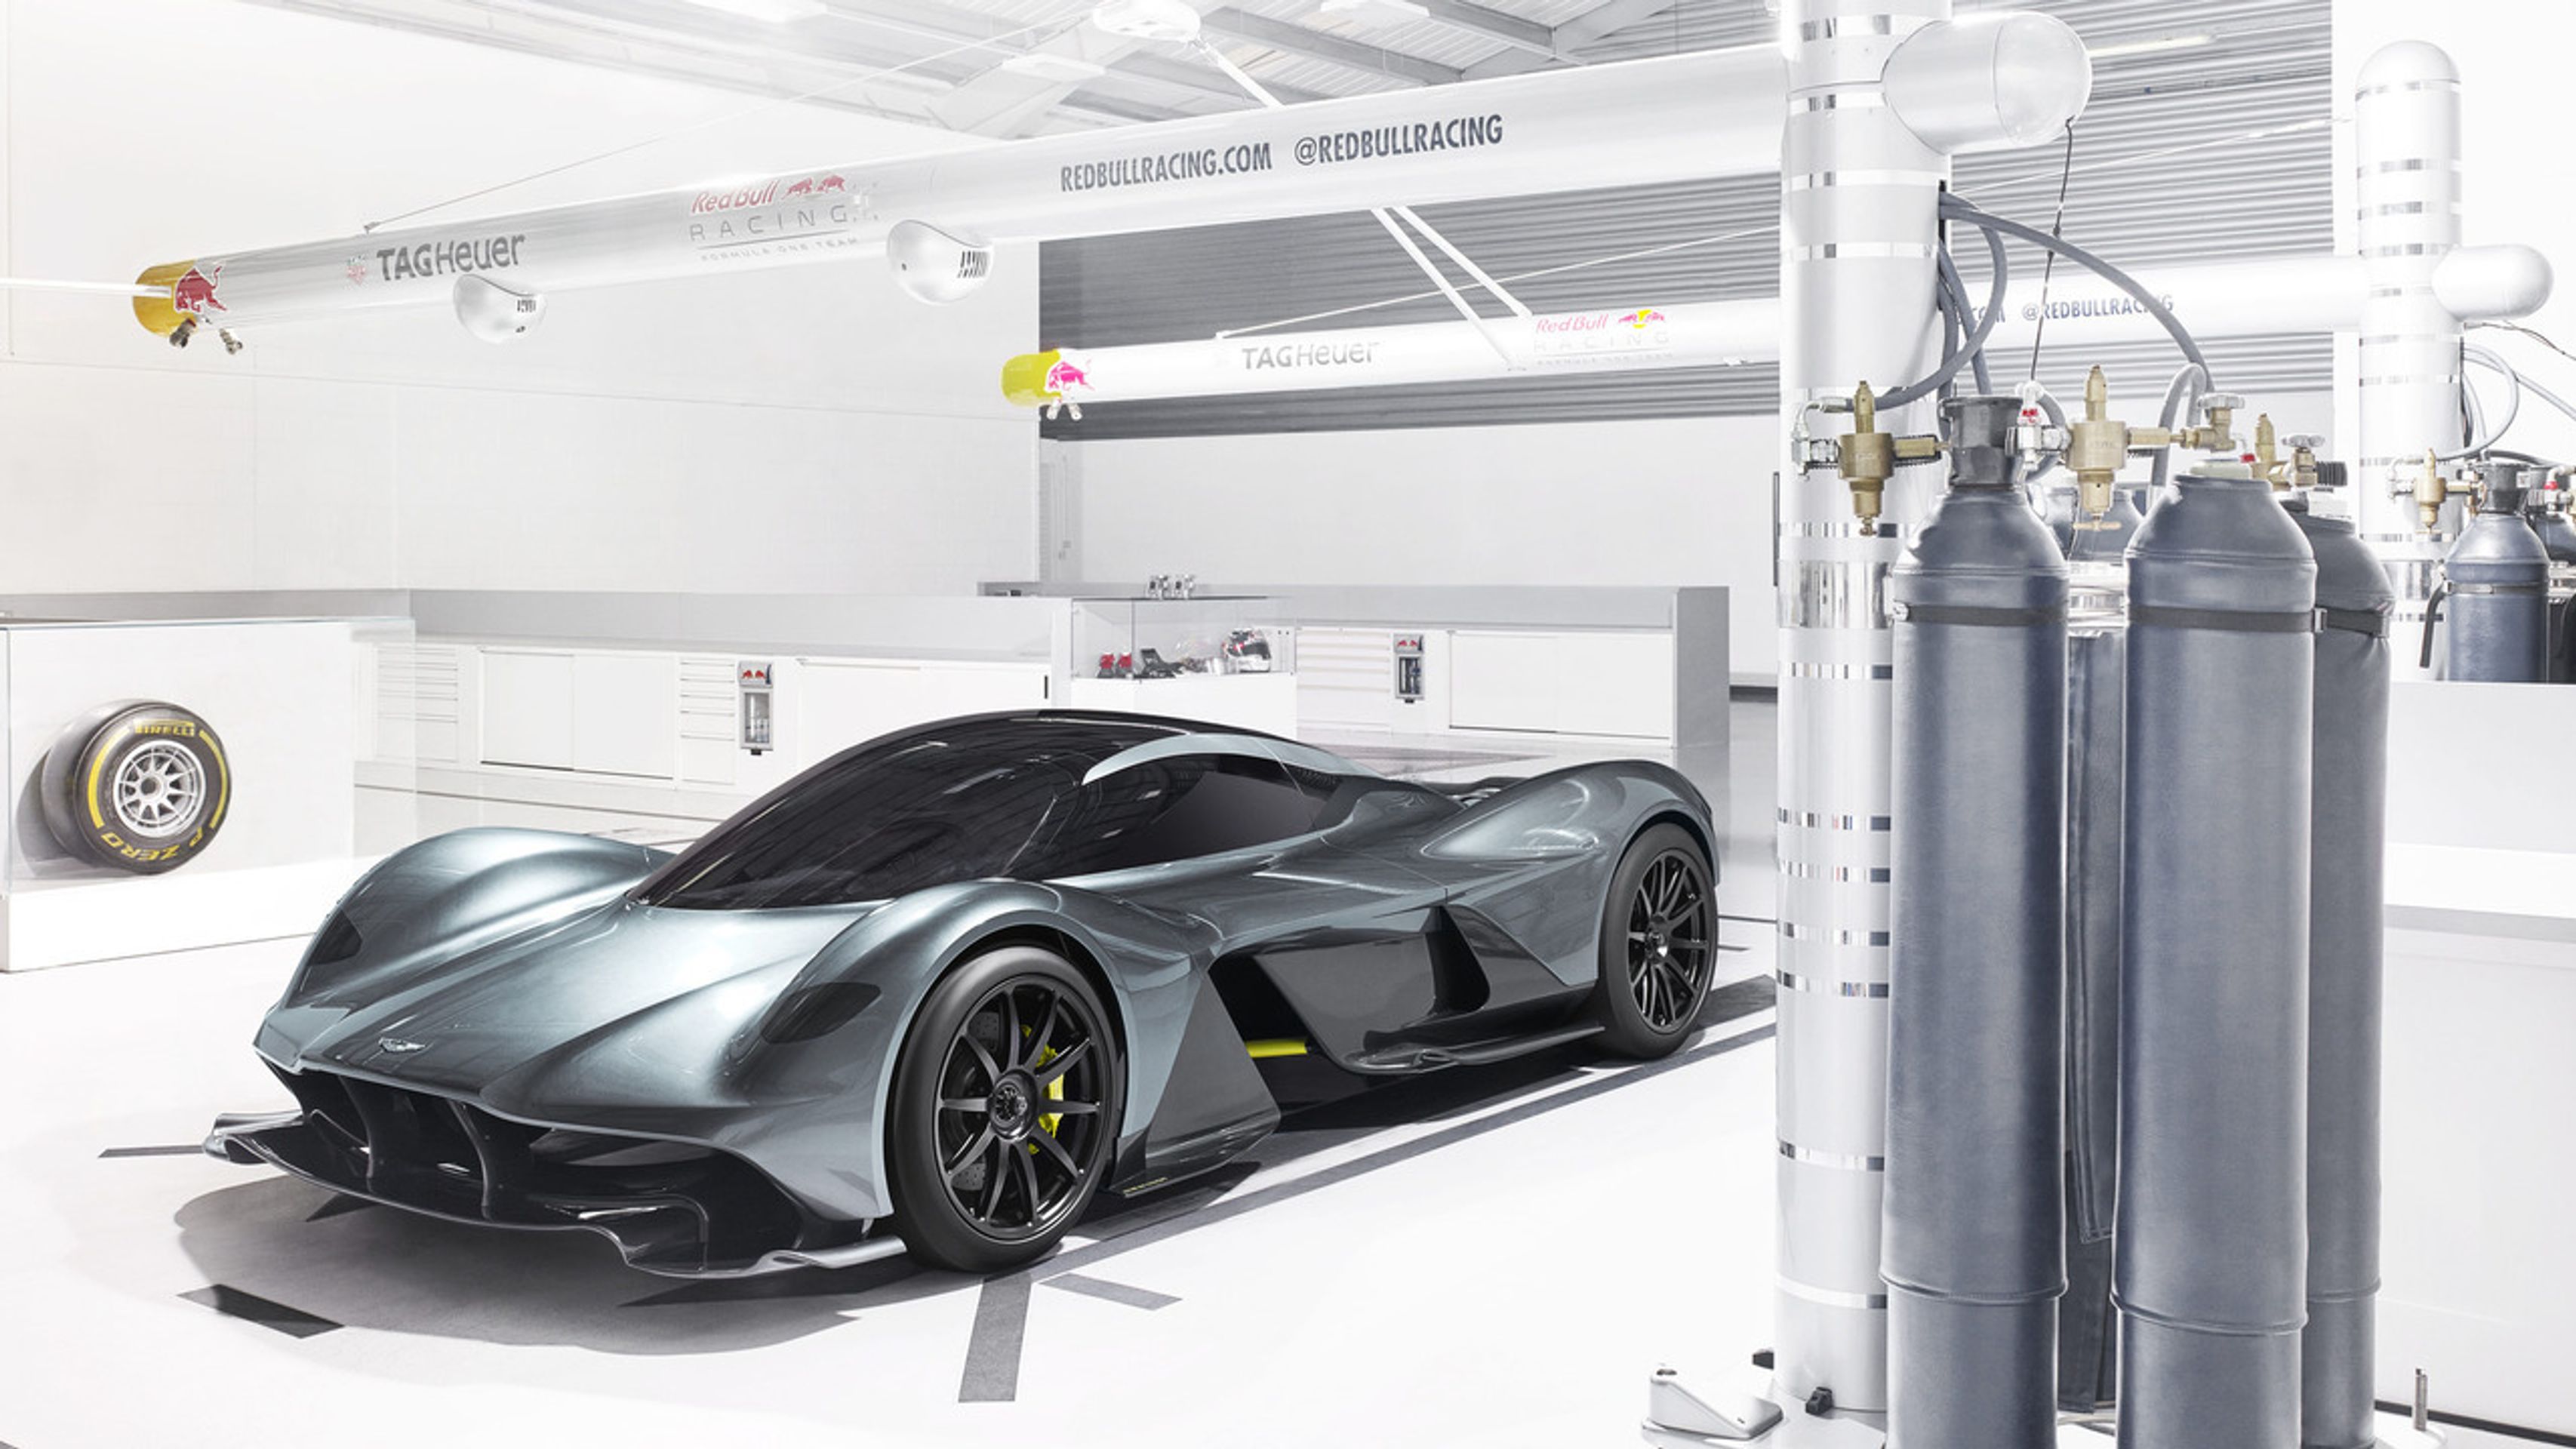 AM-RB 001 - 14 - GALERIE: AM-RB 001 (1/7)